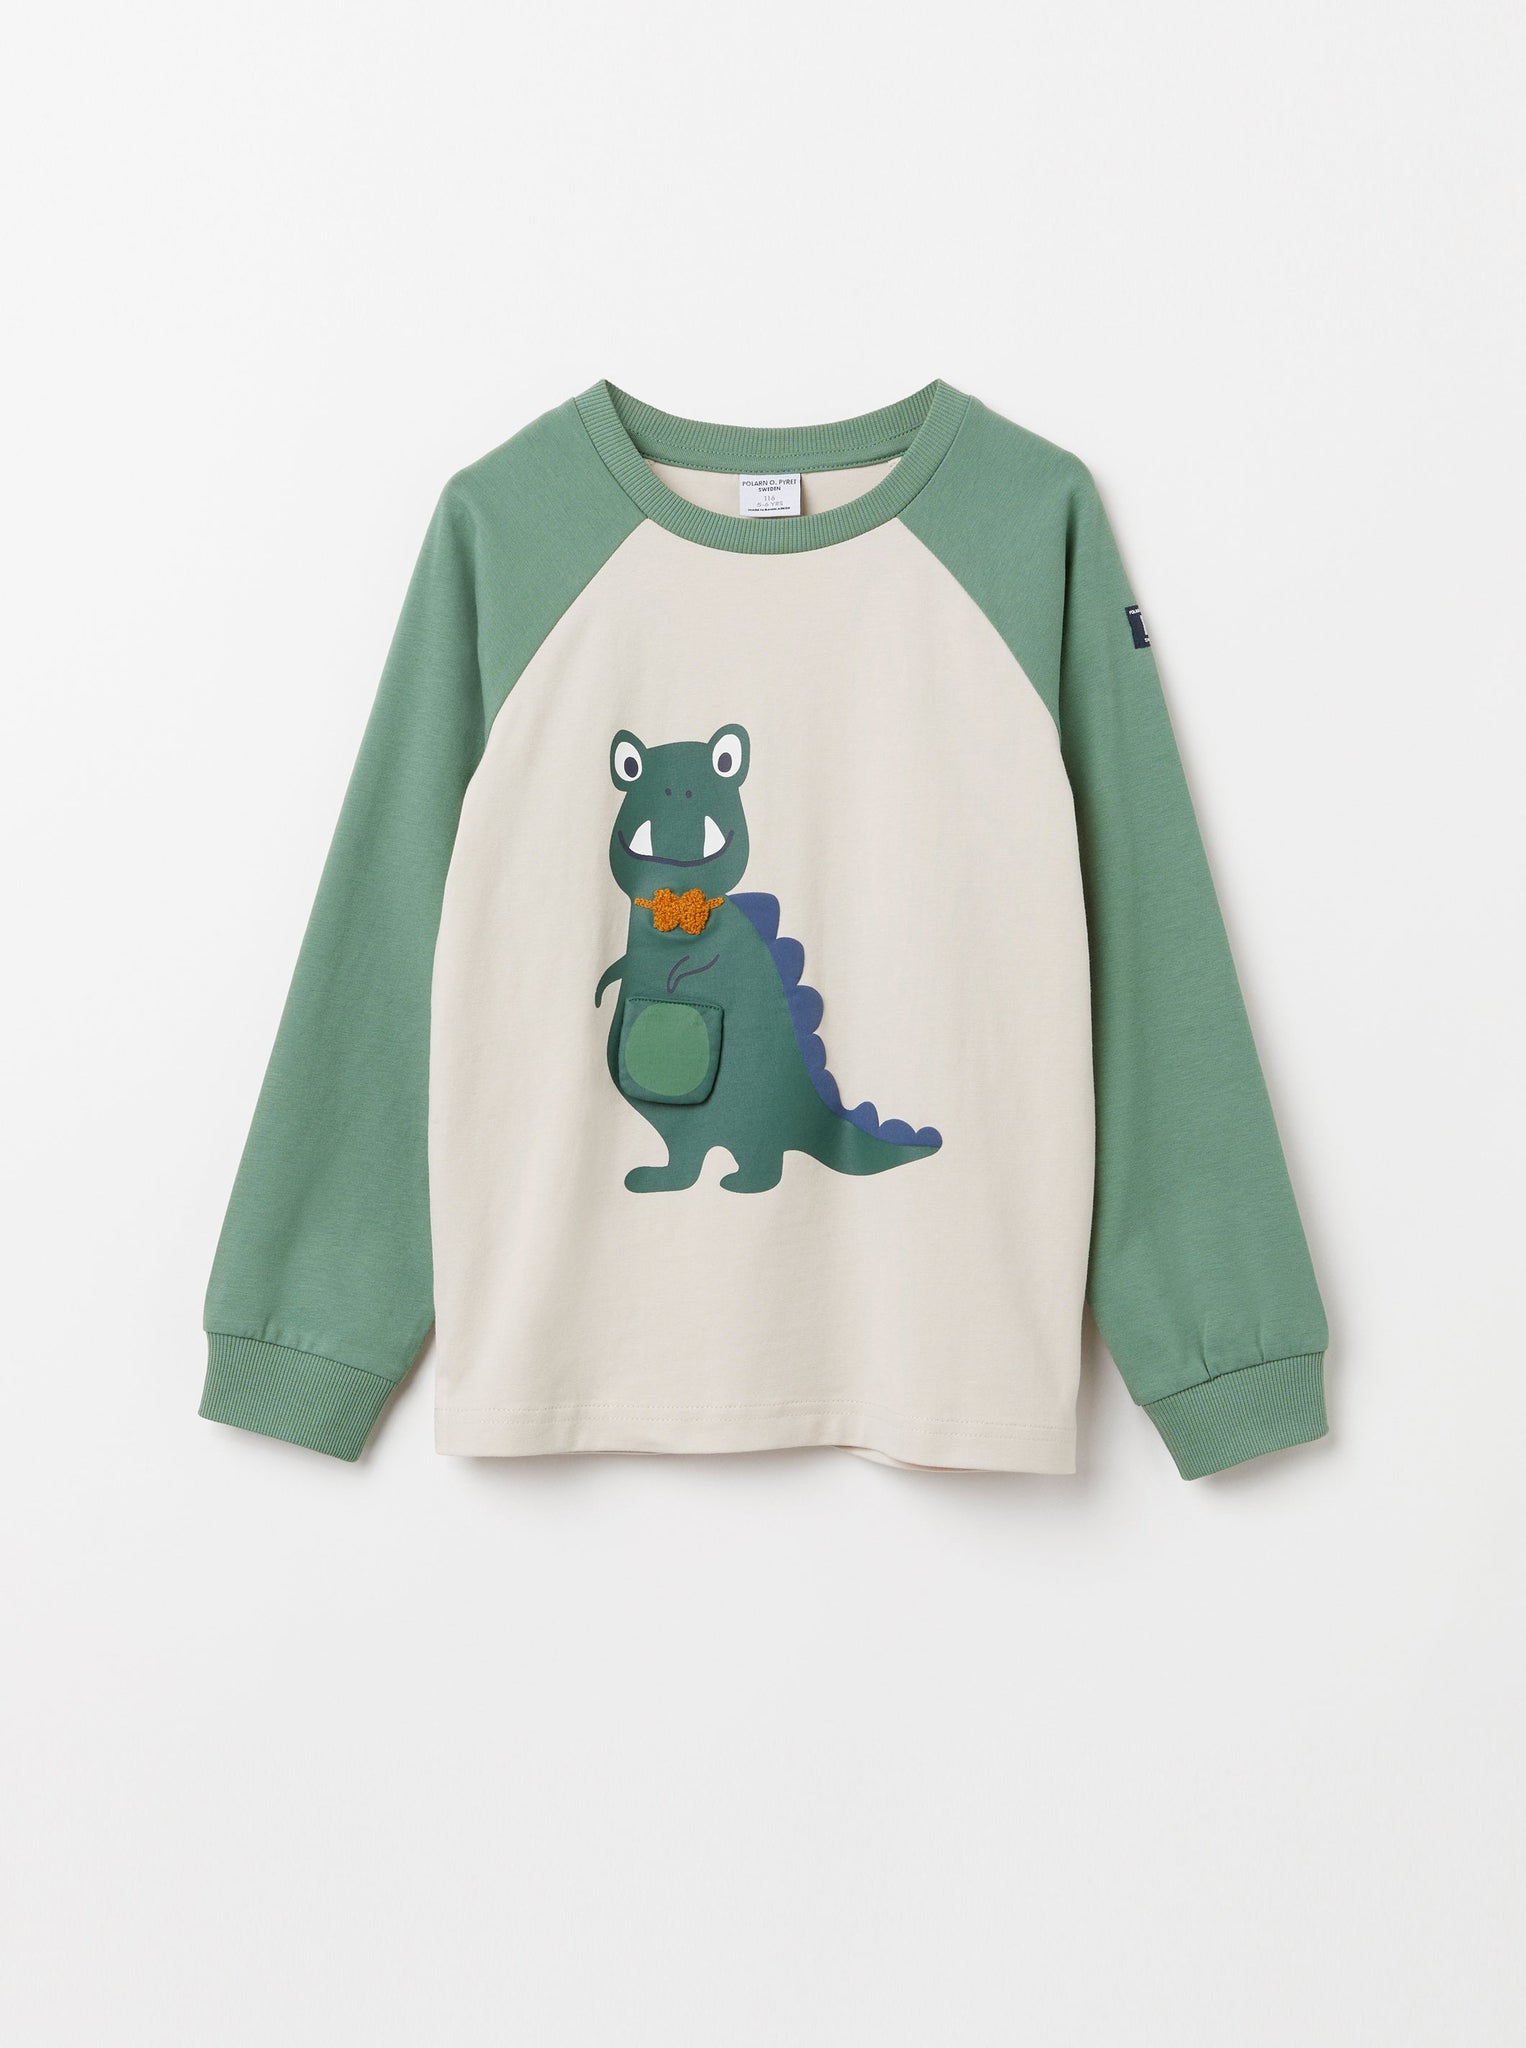 Organic Cotton Dinosaur Kids Top from the Polarn O. Pyret Kidswear collection. Ethically produced kids clothing.